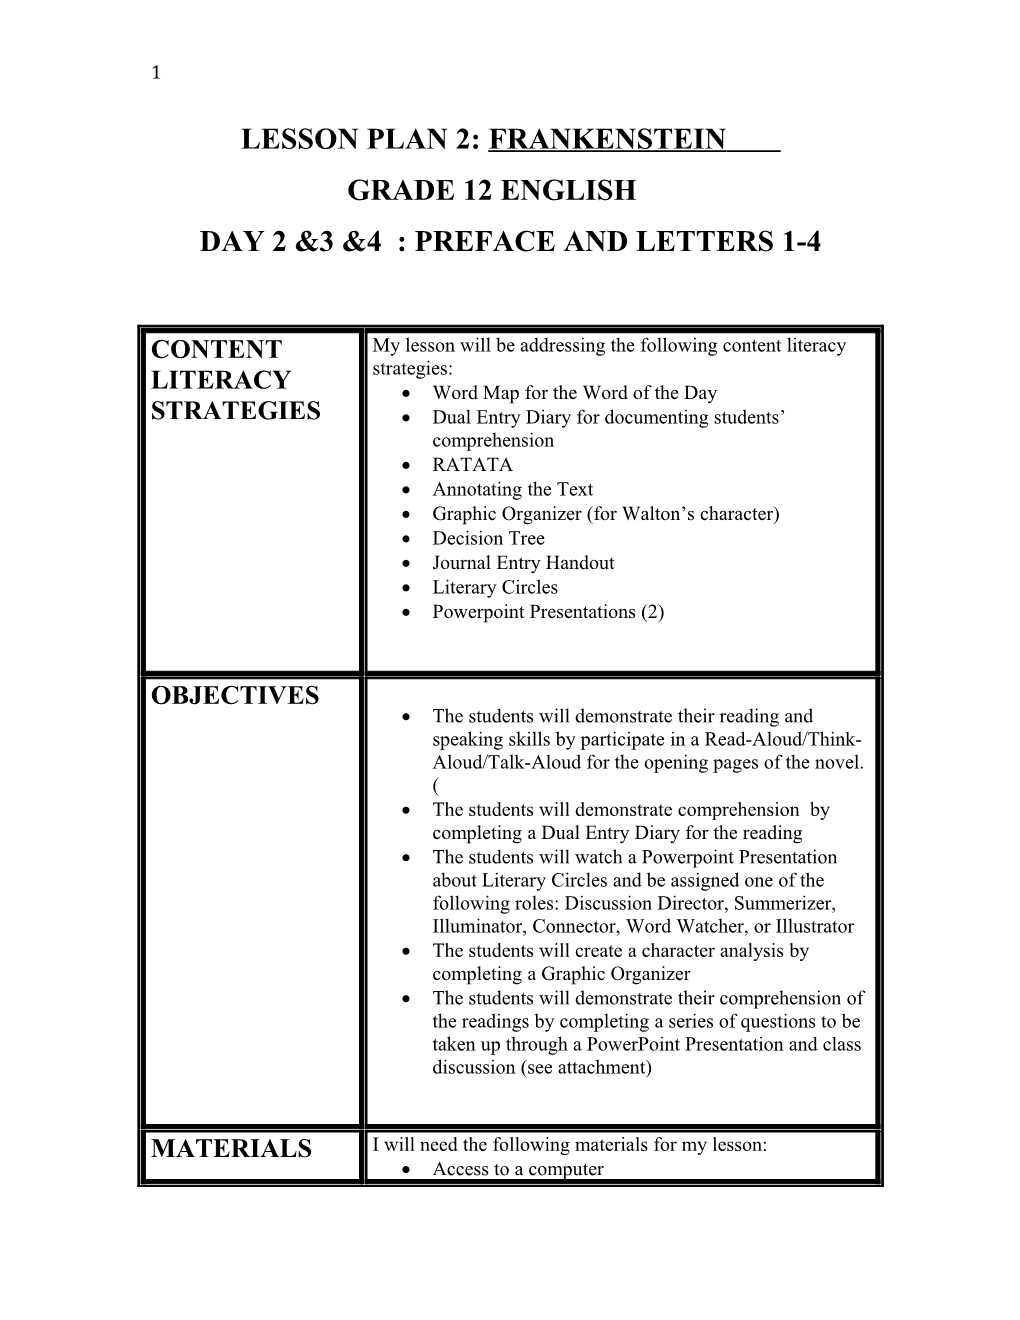 Day 2 &3 &4 : Preface and Letters 1-4